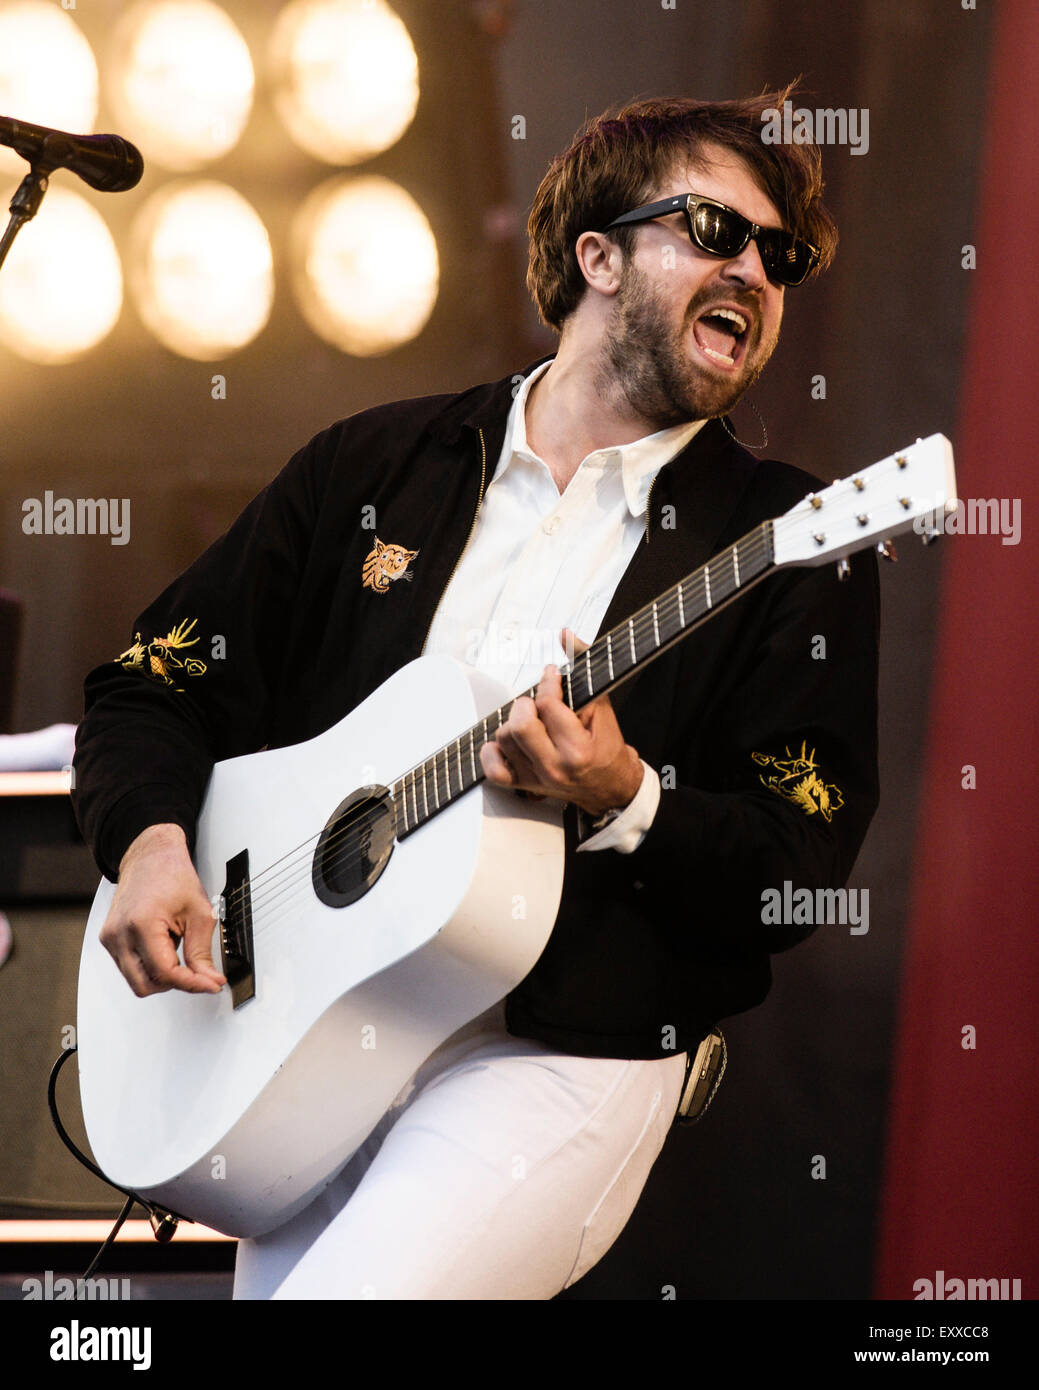 The Vaccines plays Glastonbury Festival at Worthy Farm on 26/06/2015 at Worthy Farm, Glastonbury.  Persons pictured: Justin Hayward-Young. Picture by Julie Edwards Stock Photo